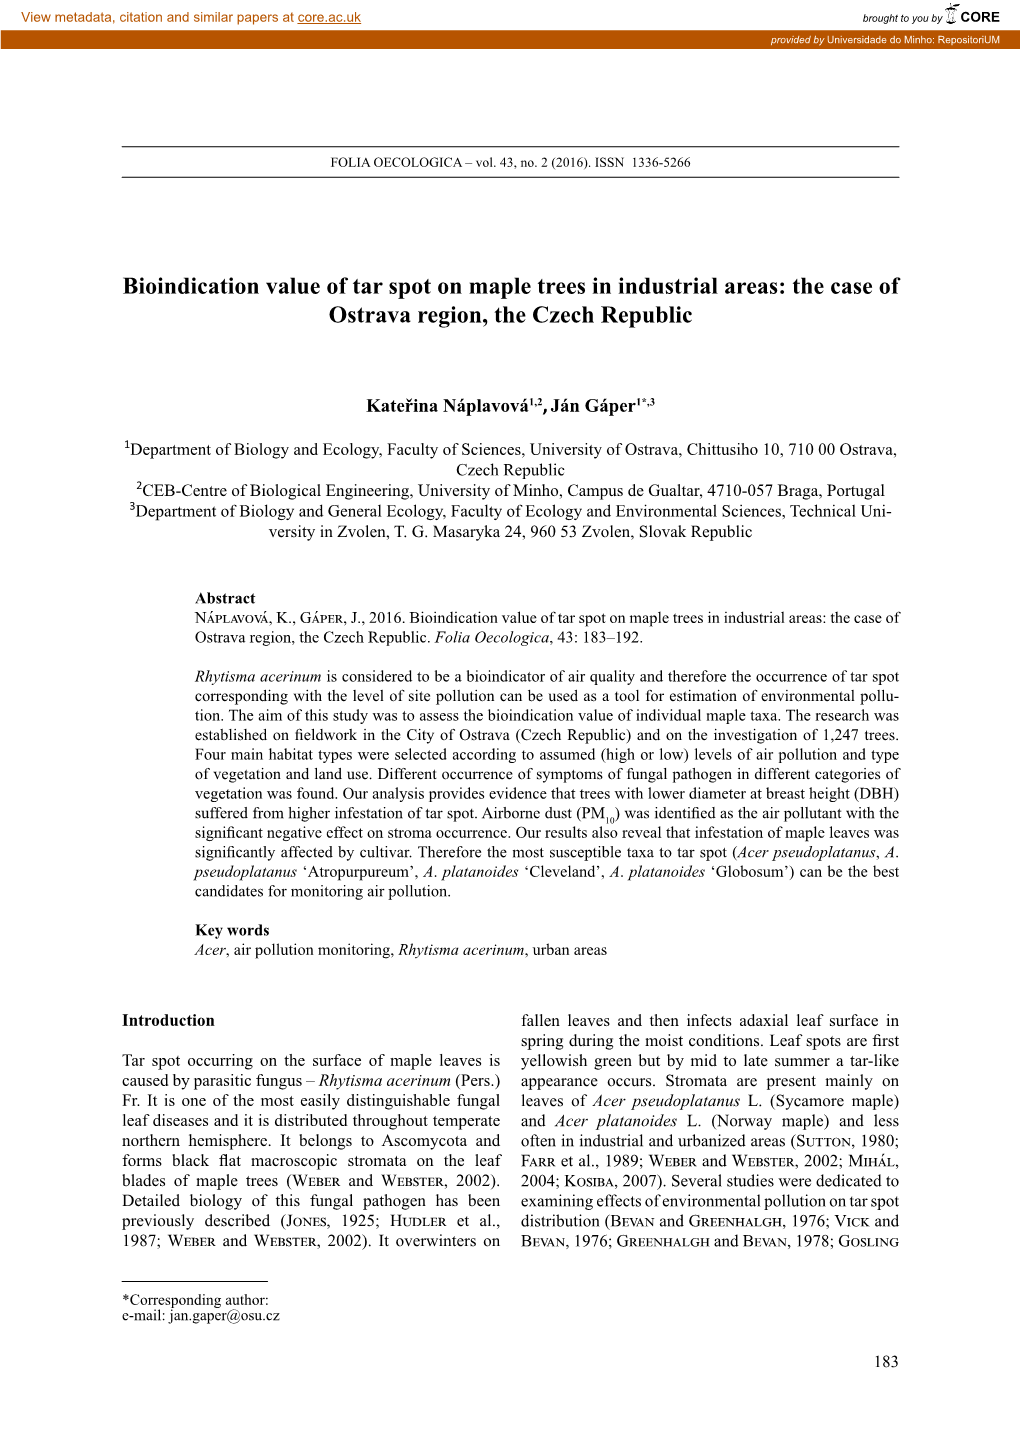 Bioindication Value of Tar Spot on Maple Trees in Industrial Areas: the Case of Ostrava Region, the Czech Republic